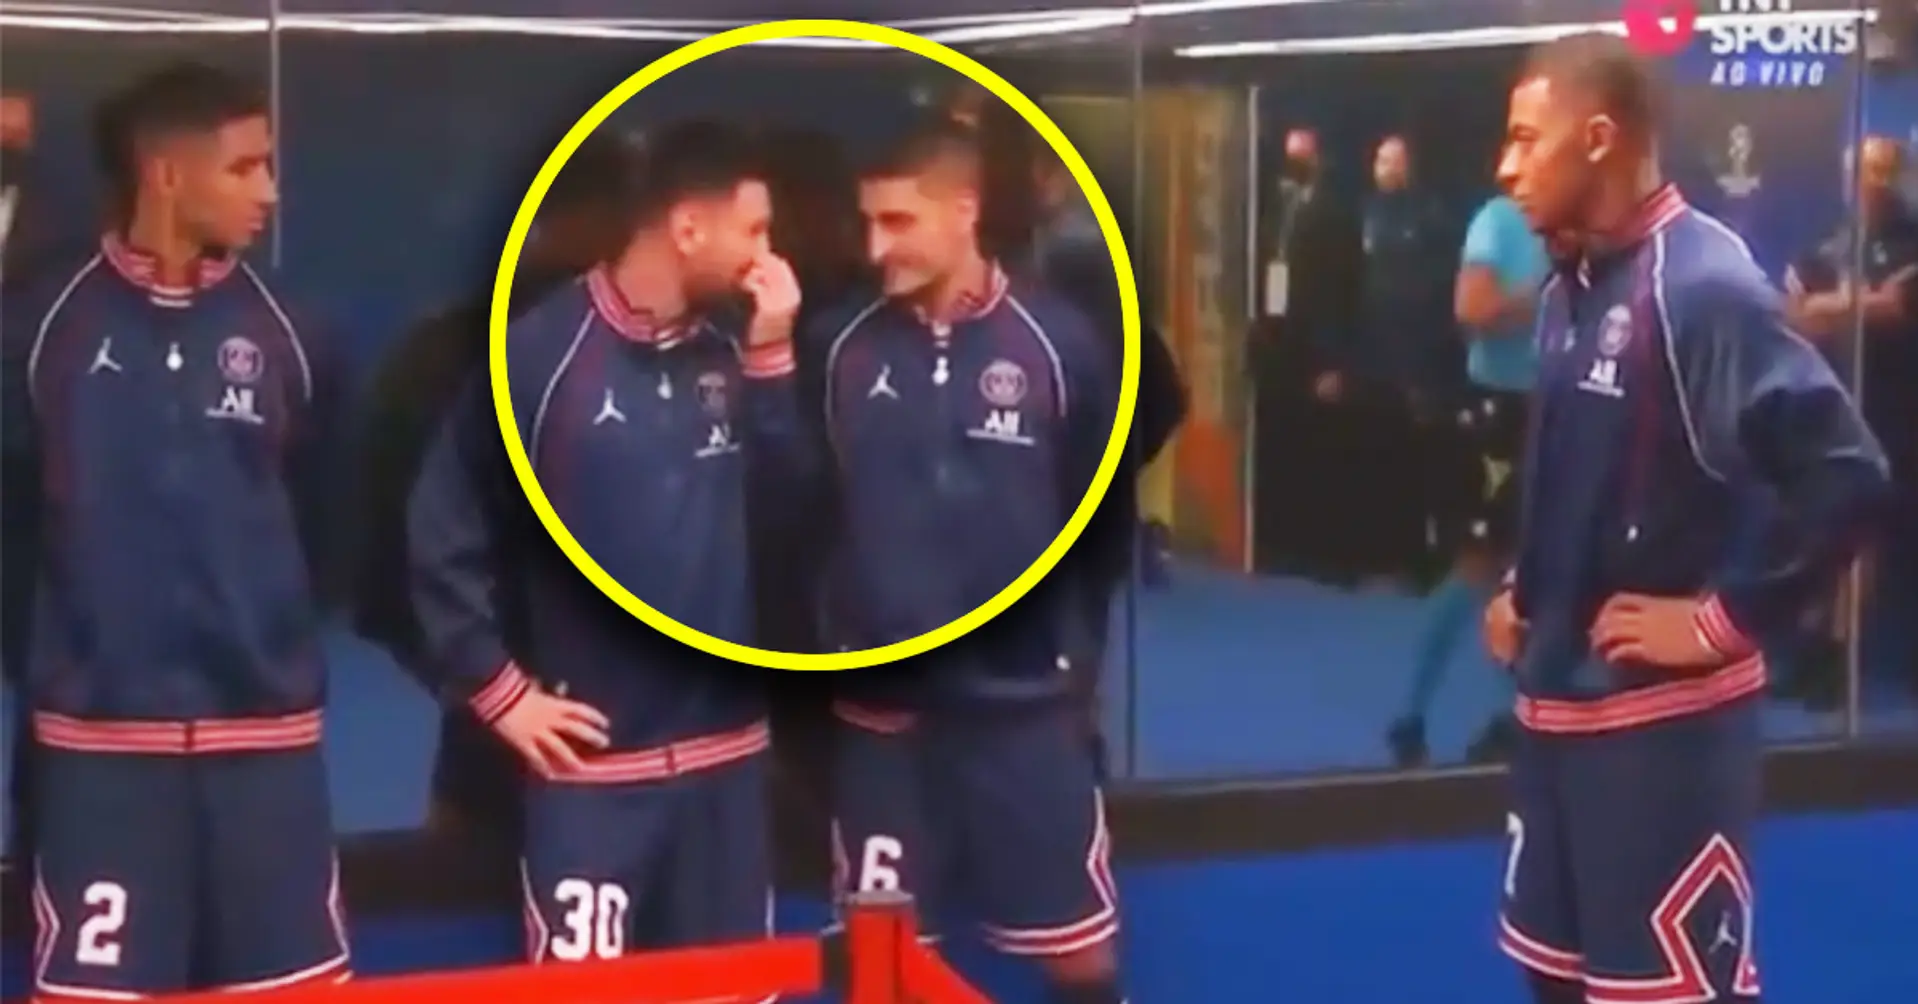 Leo Messi’s conversation with Verratti, Mbappe and Hakimi in the tunnel caught on camera 